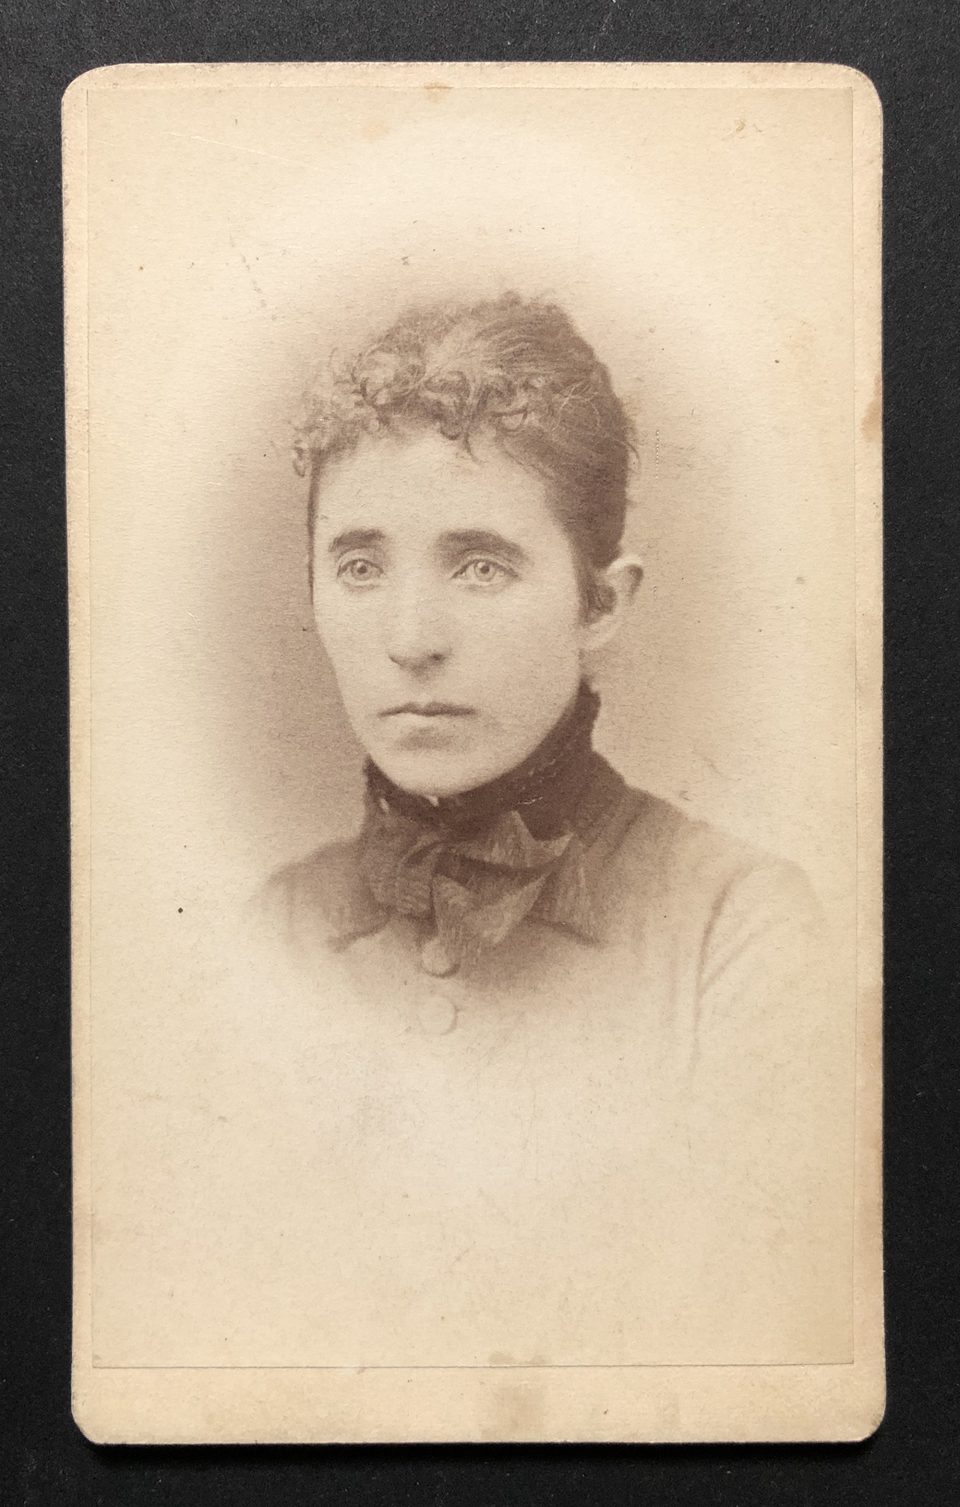 Head and shoulders portrait of a somber young woman in carte de visite size, made by the studio of W.H. Jacoby of Minneapolis.